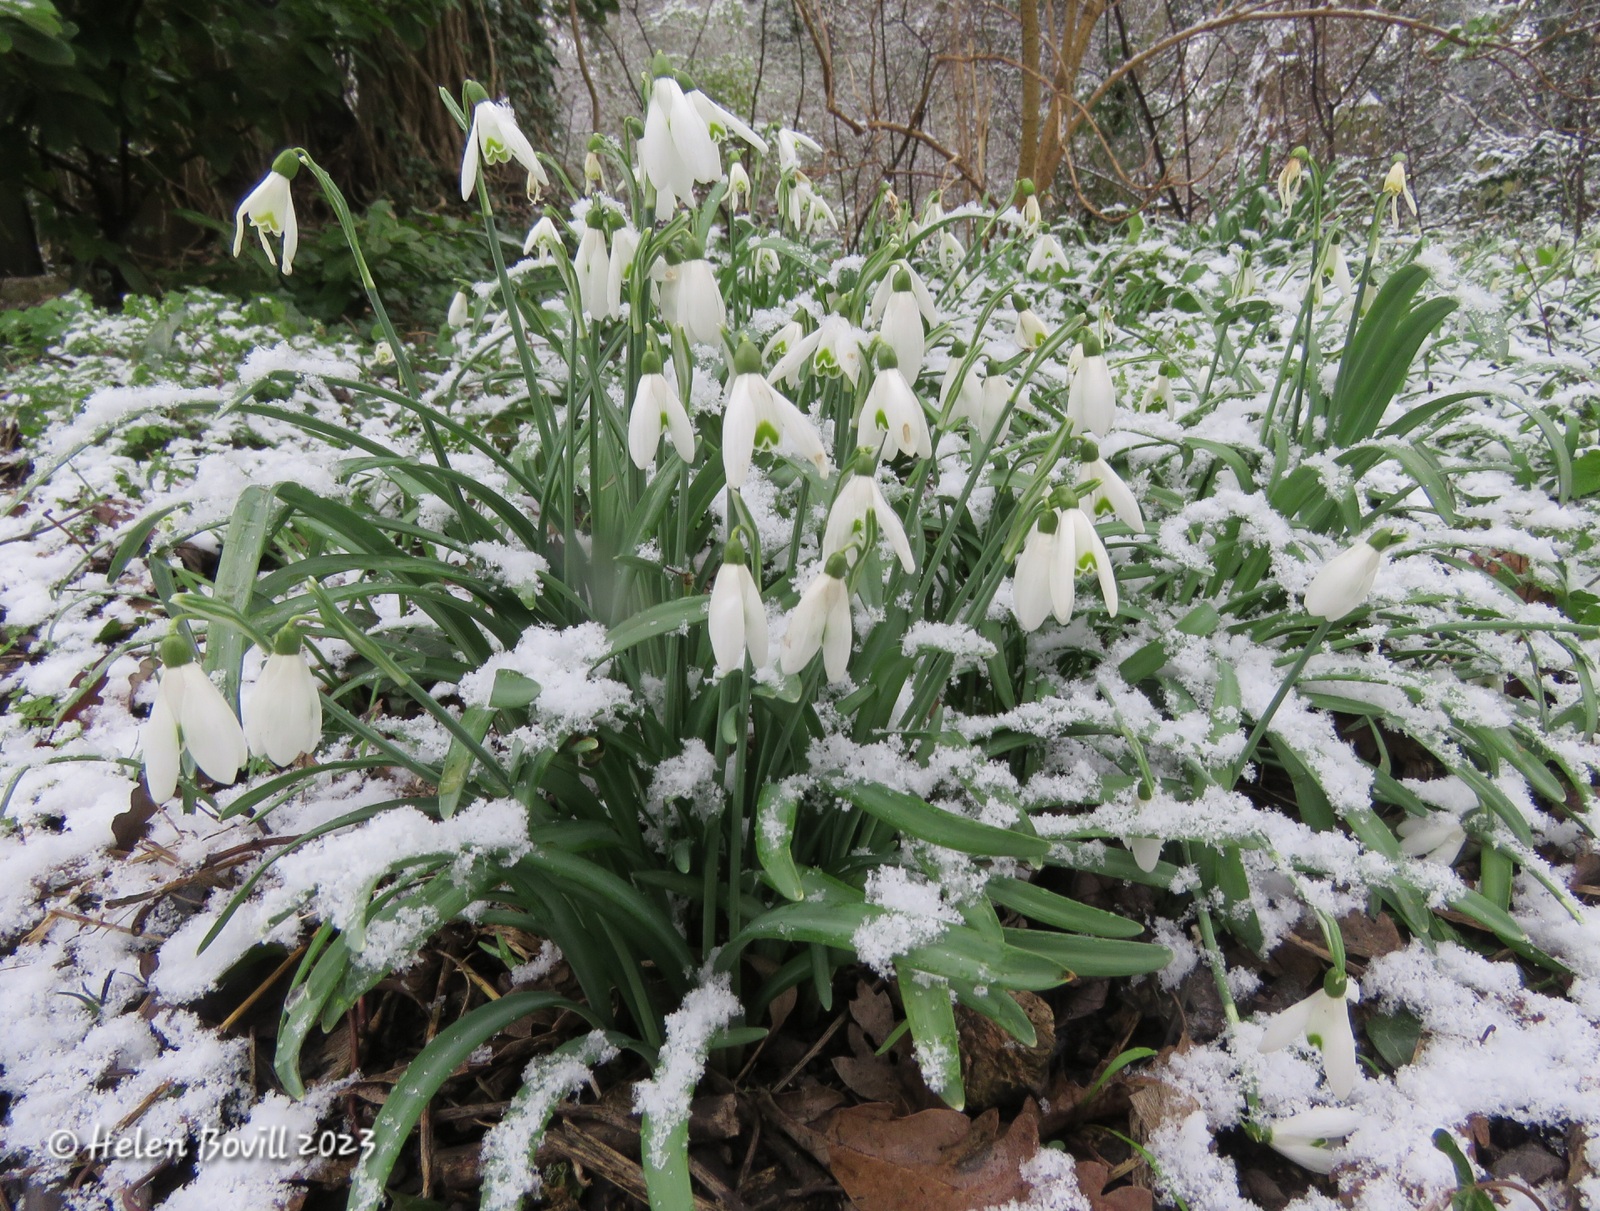 Snowdrops with a light dusting of snow on them in the cemetery